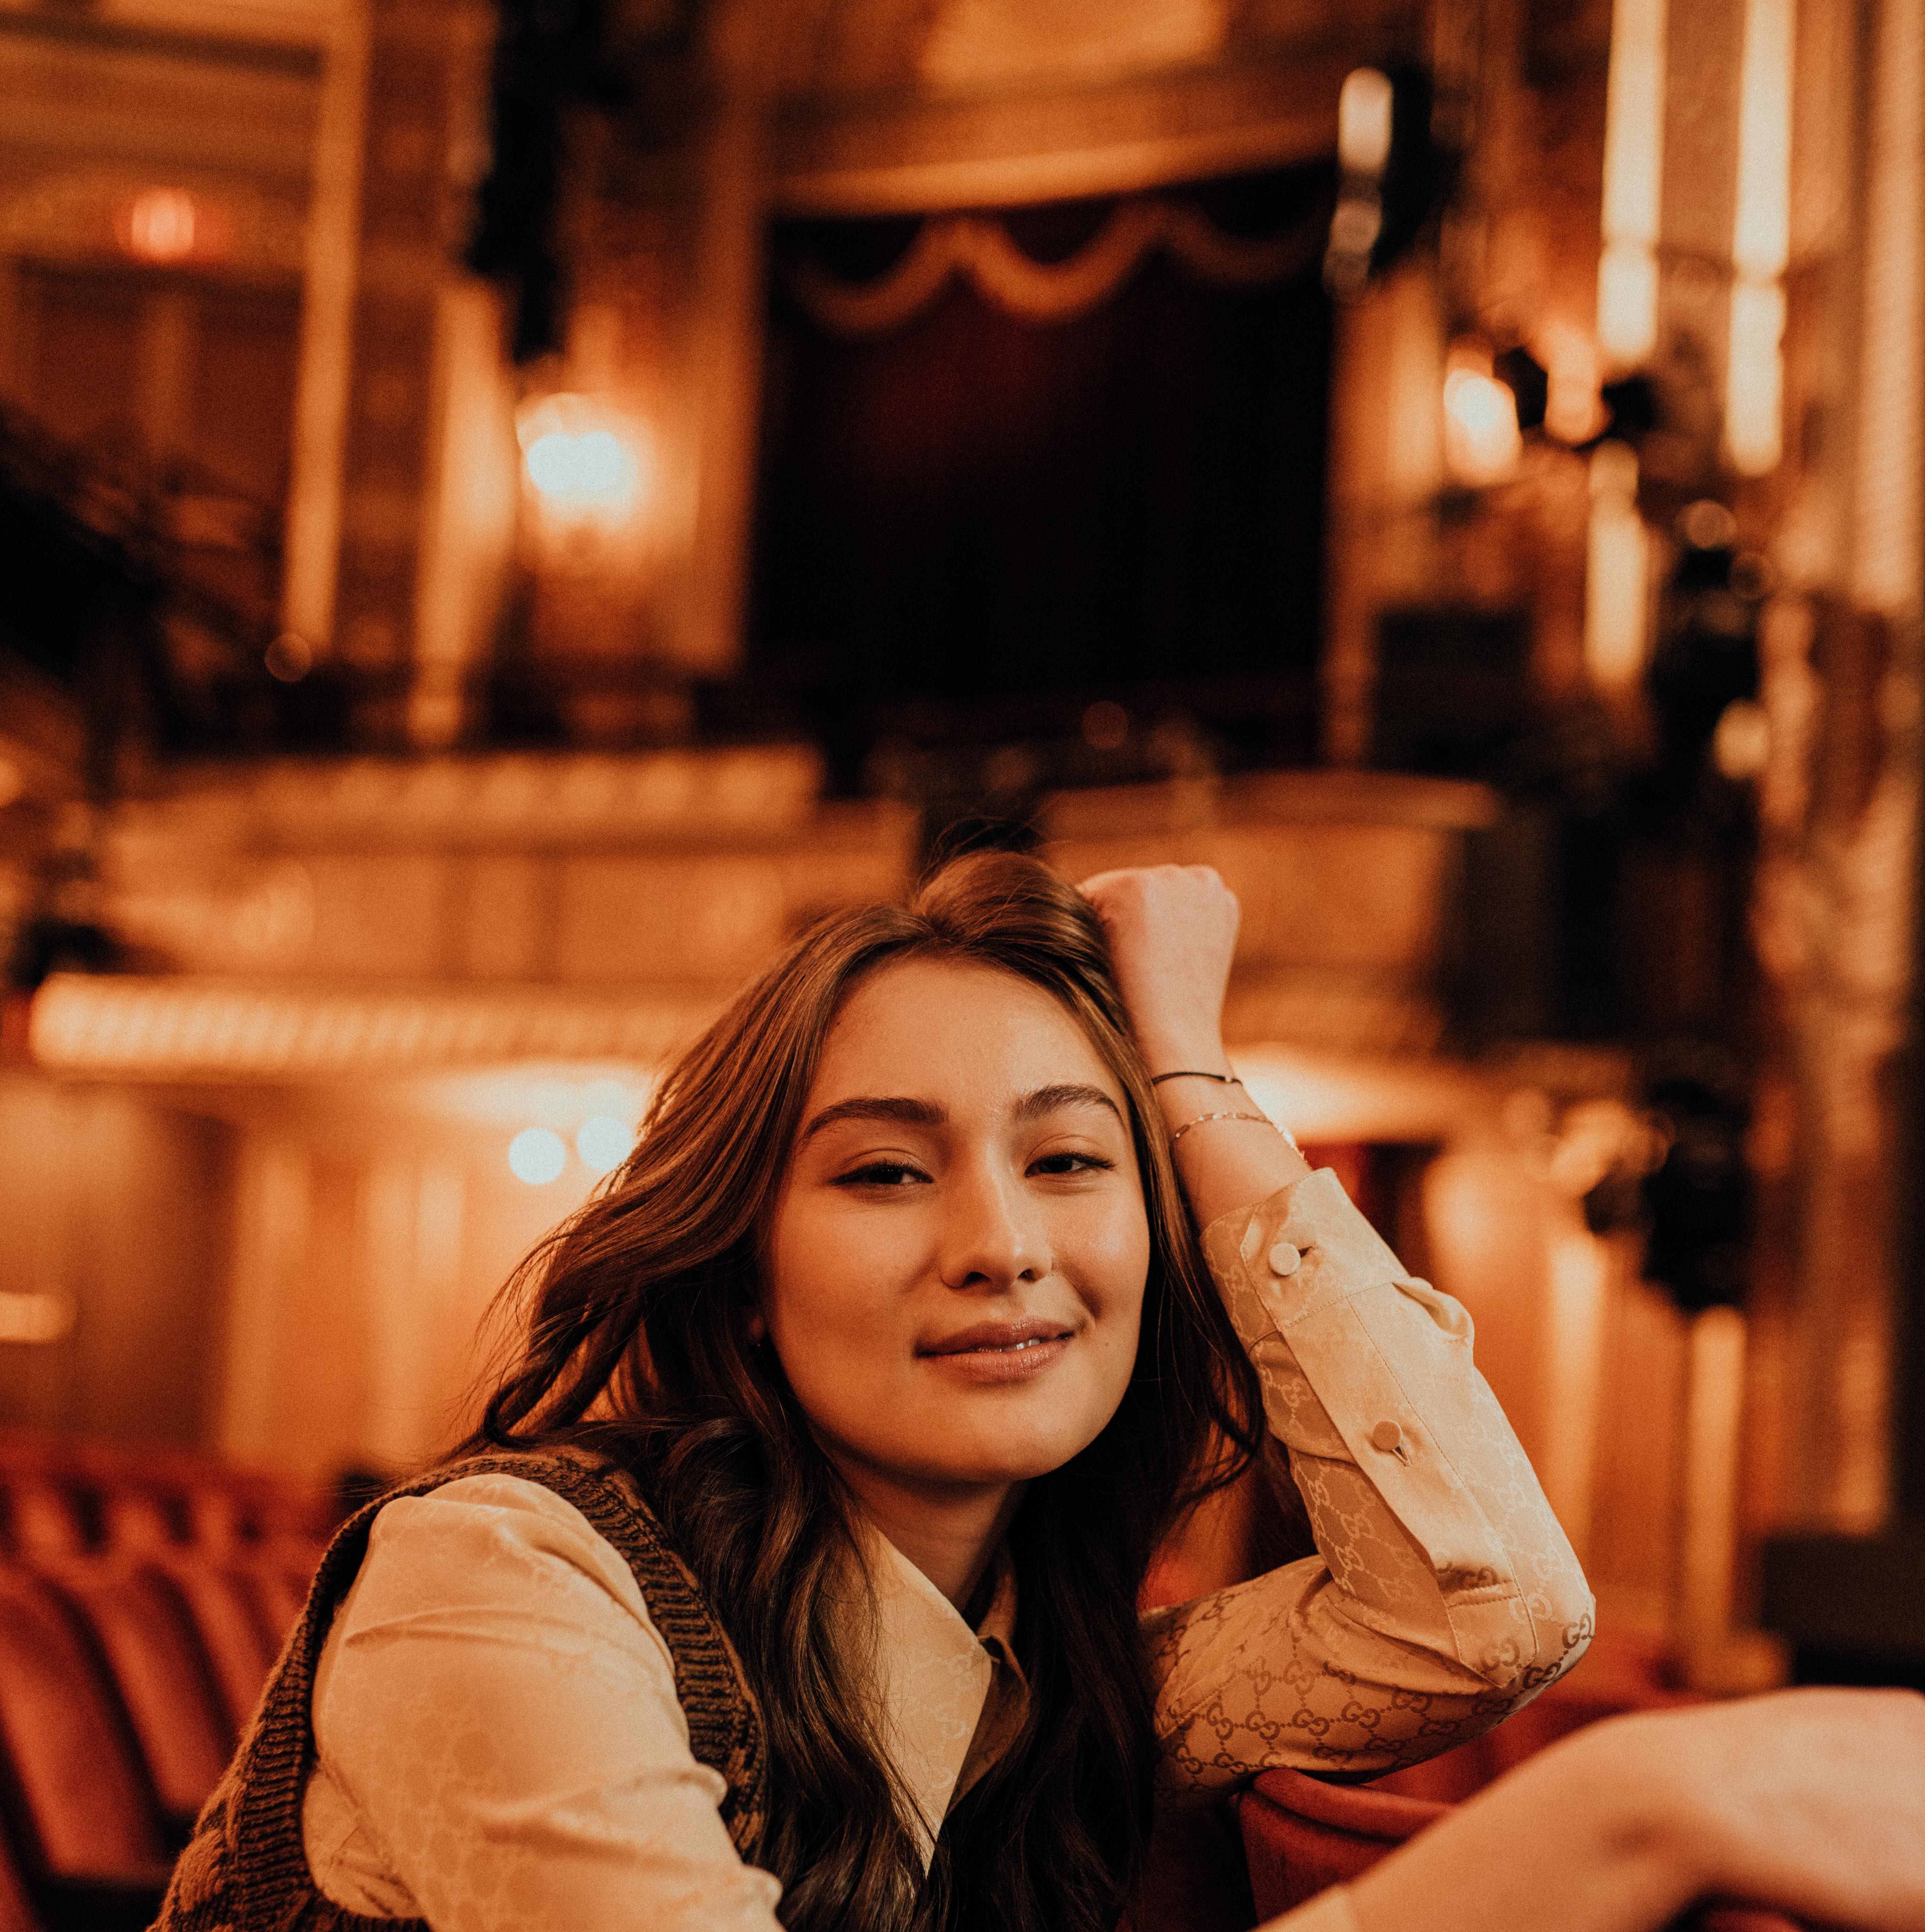 The Summer I Turned Pretty stars discusses her Broadway debut as Eurydice in Hadestown, her friendship with Reneé Rapp, and the great Ani DiFranco.